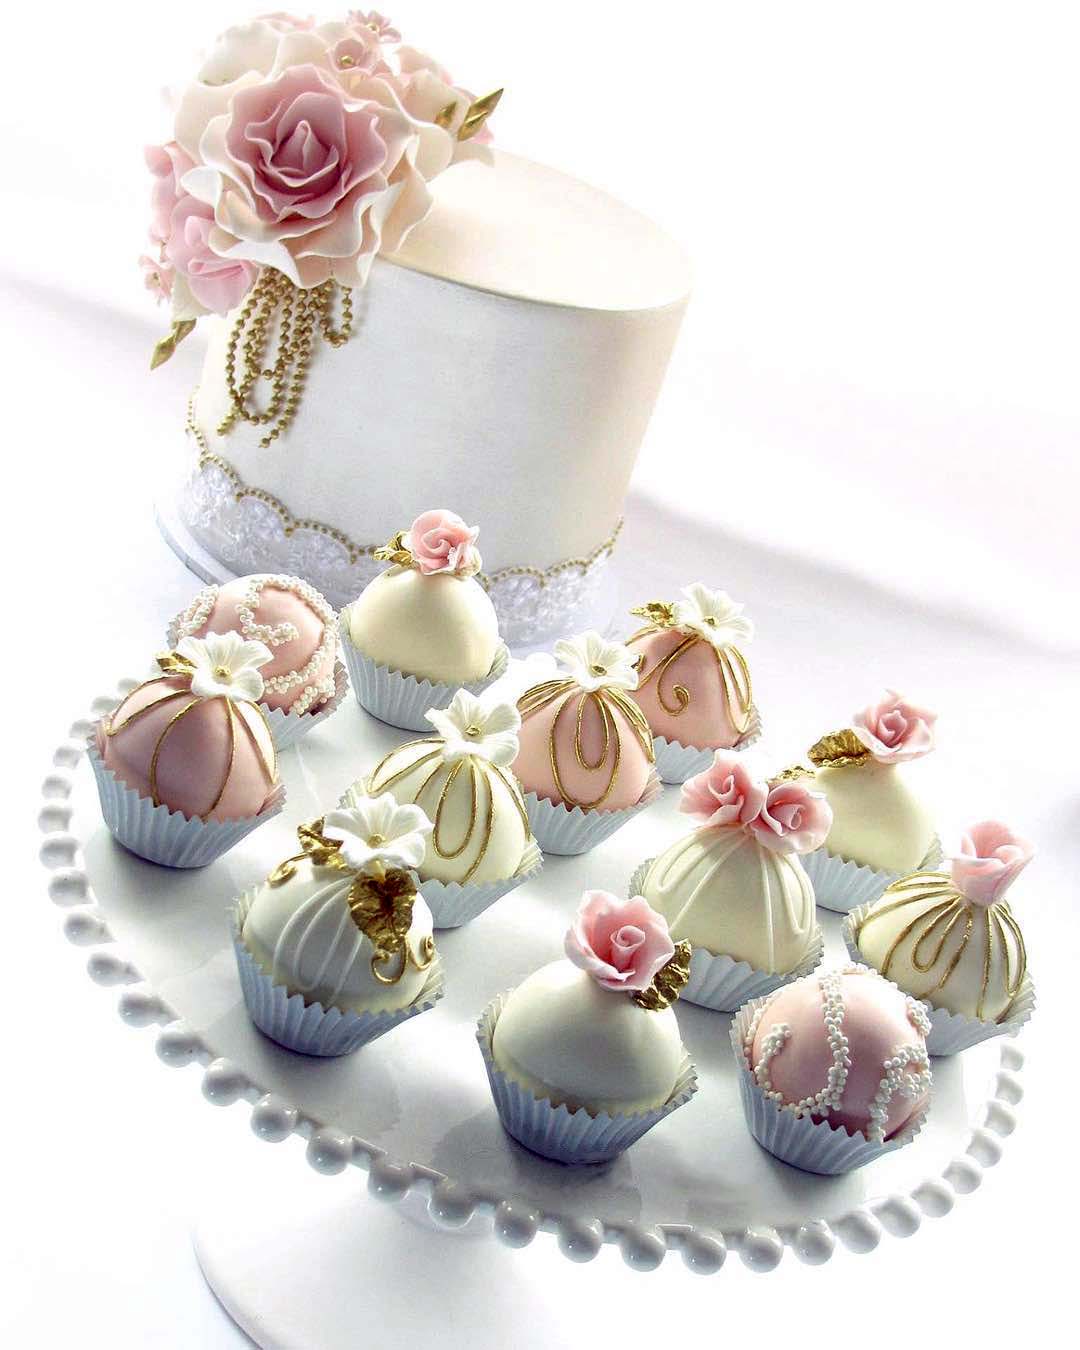 engagement party cakes small with pink flowers and poppers iconic.cake